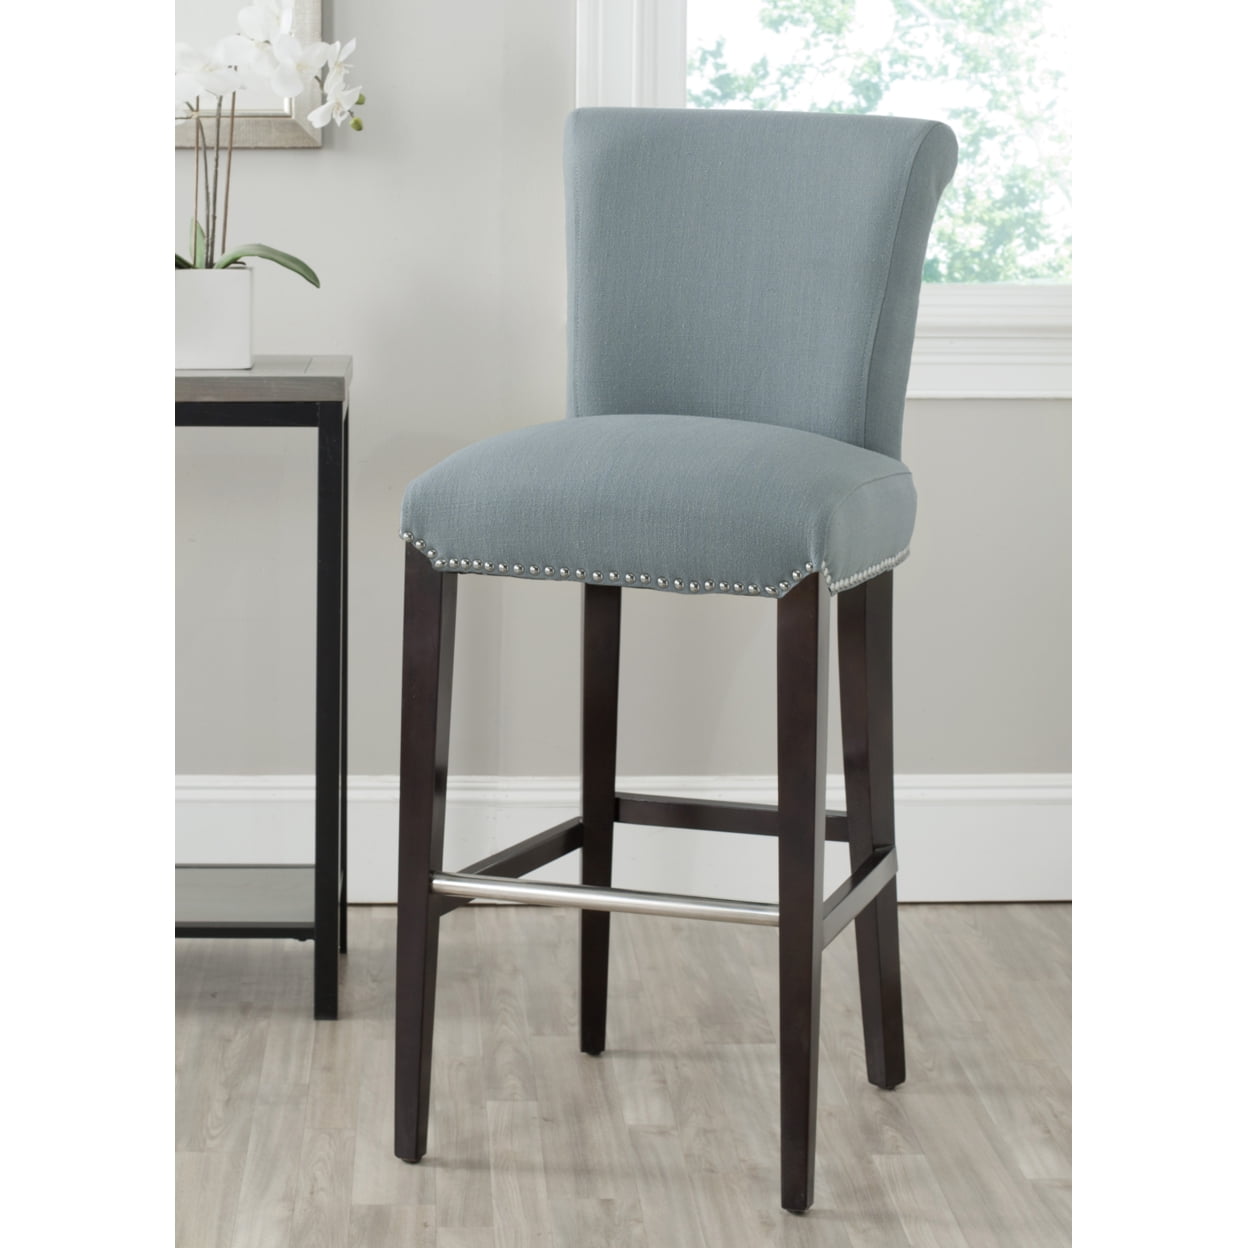 Transitional Sky Blue Leather & Wood Bar Stool with Metal Accents